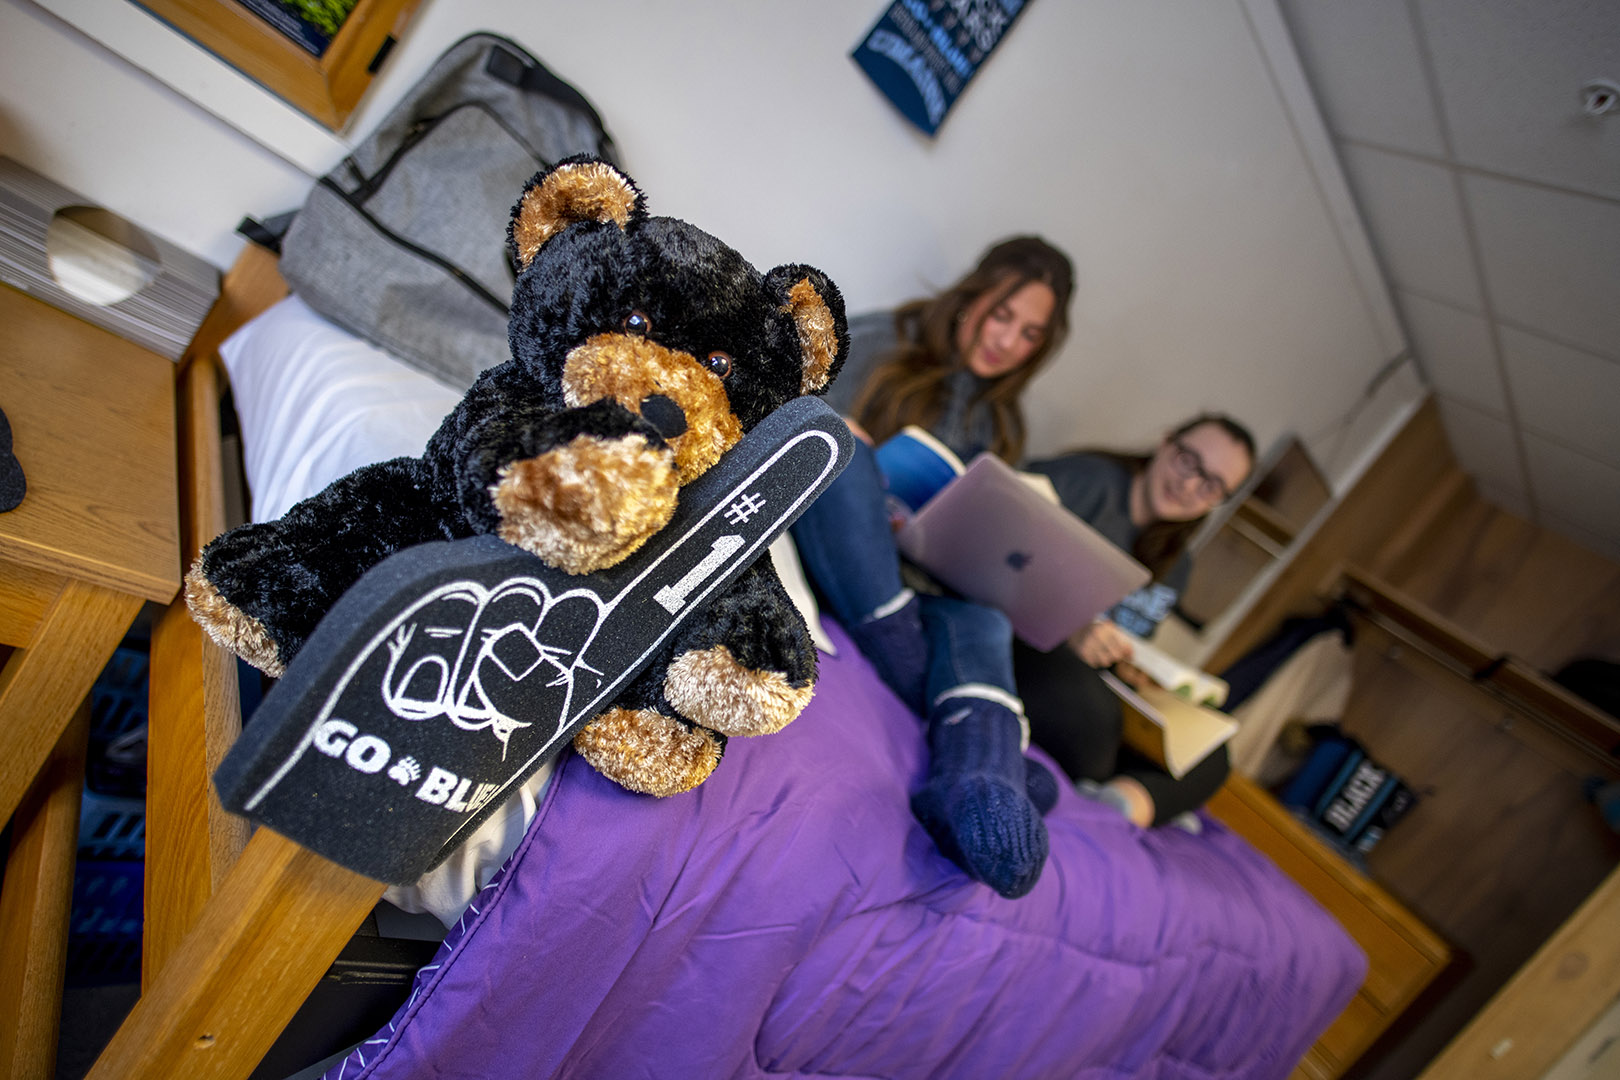 Students sit on a bed with a teddy bear and a foam finger